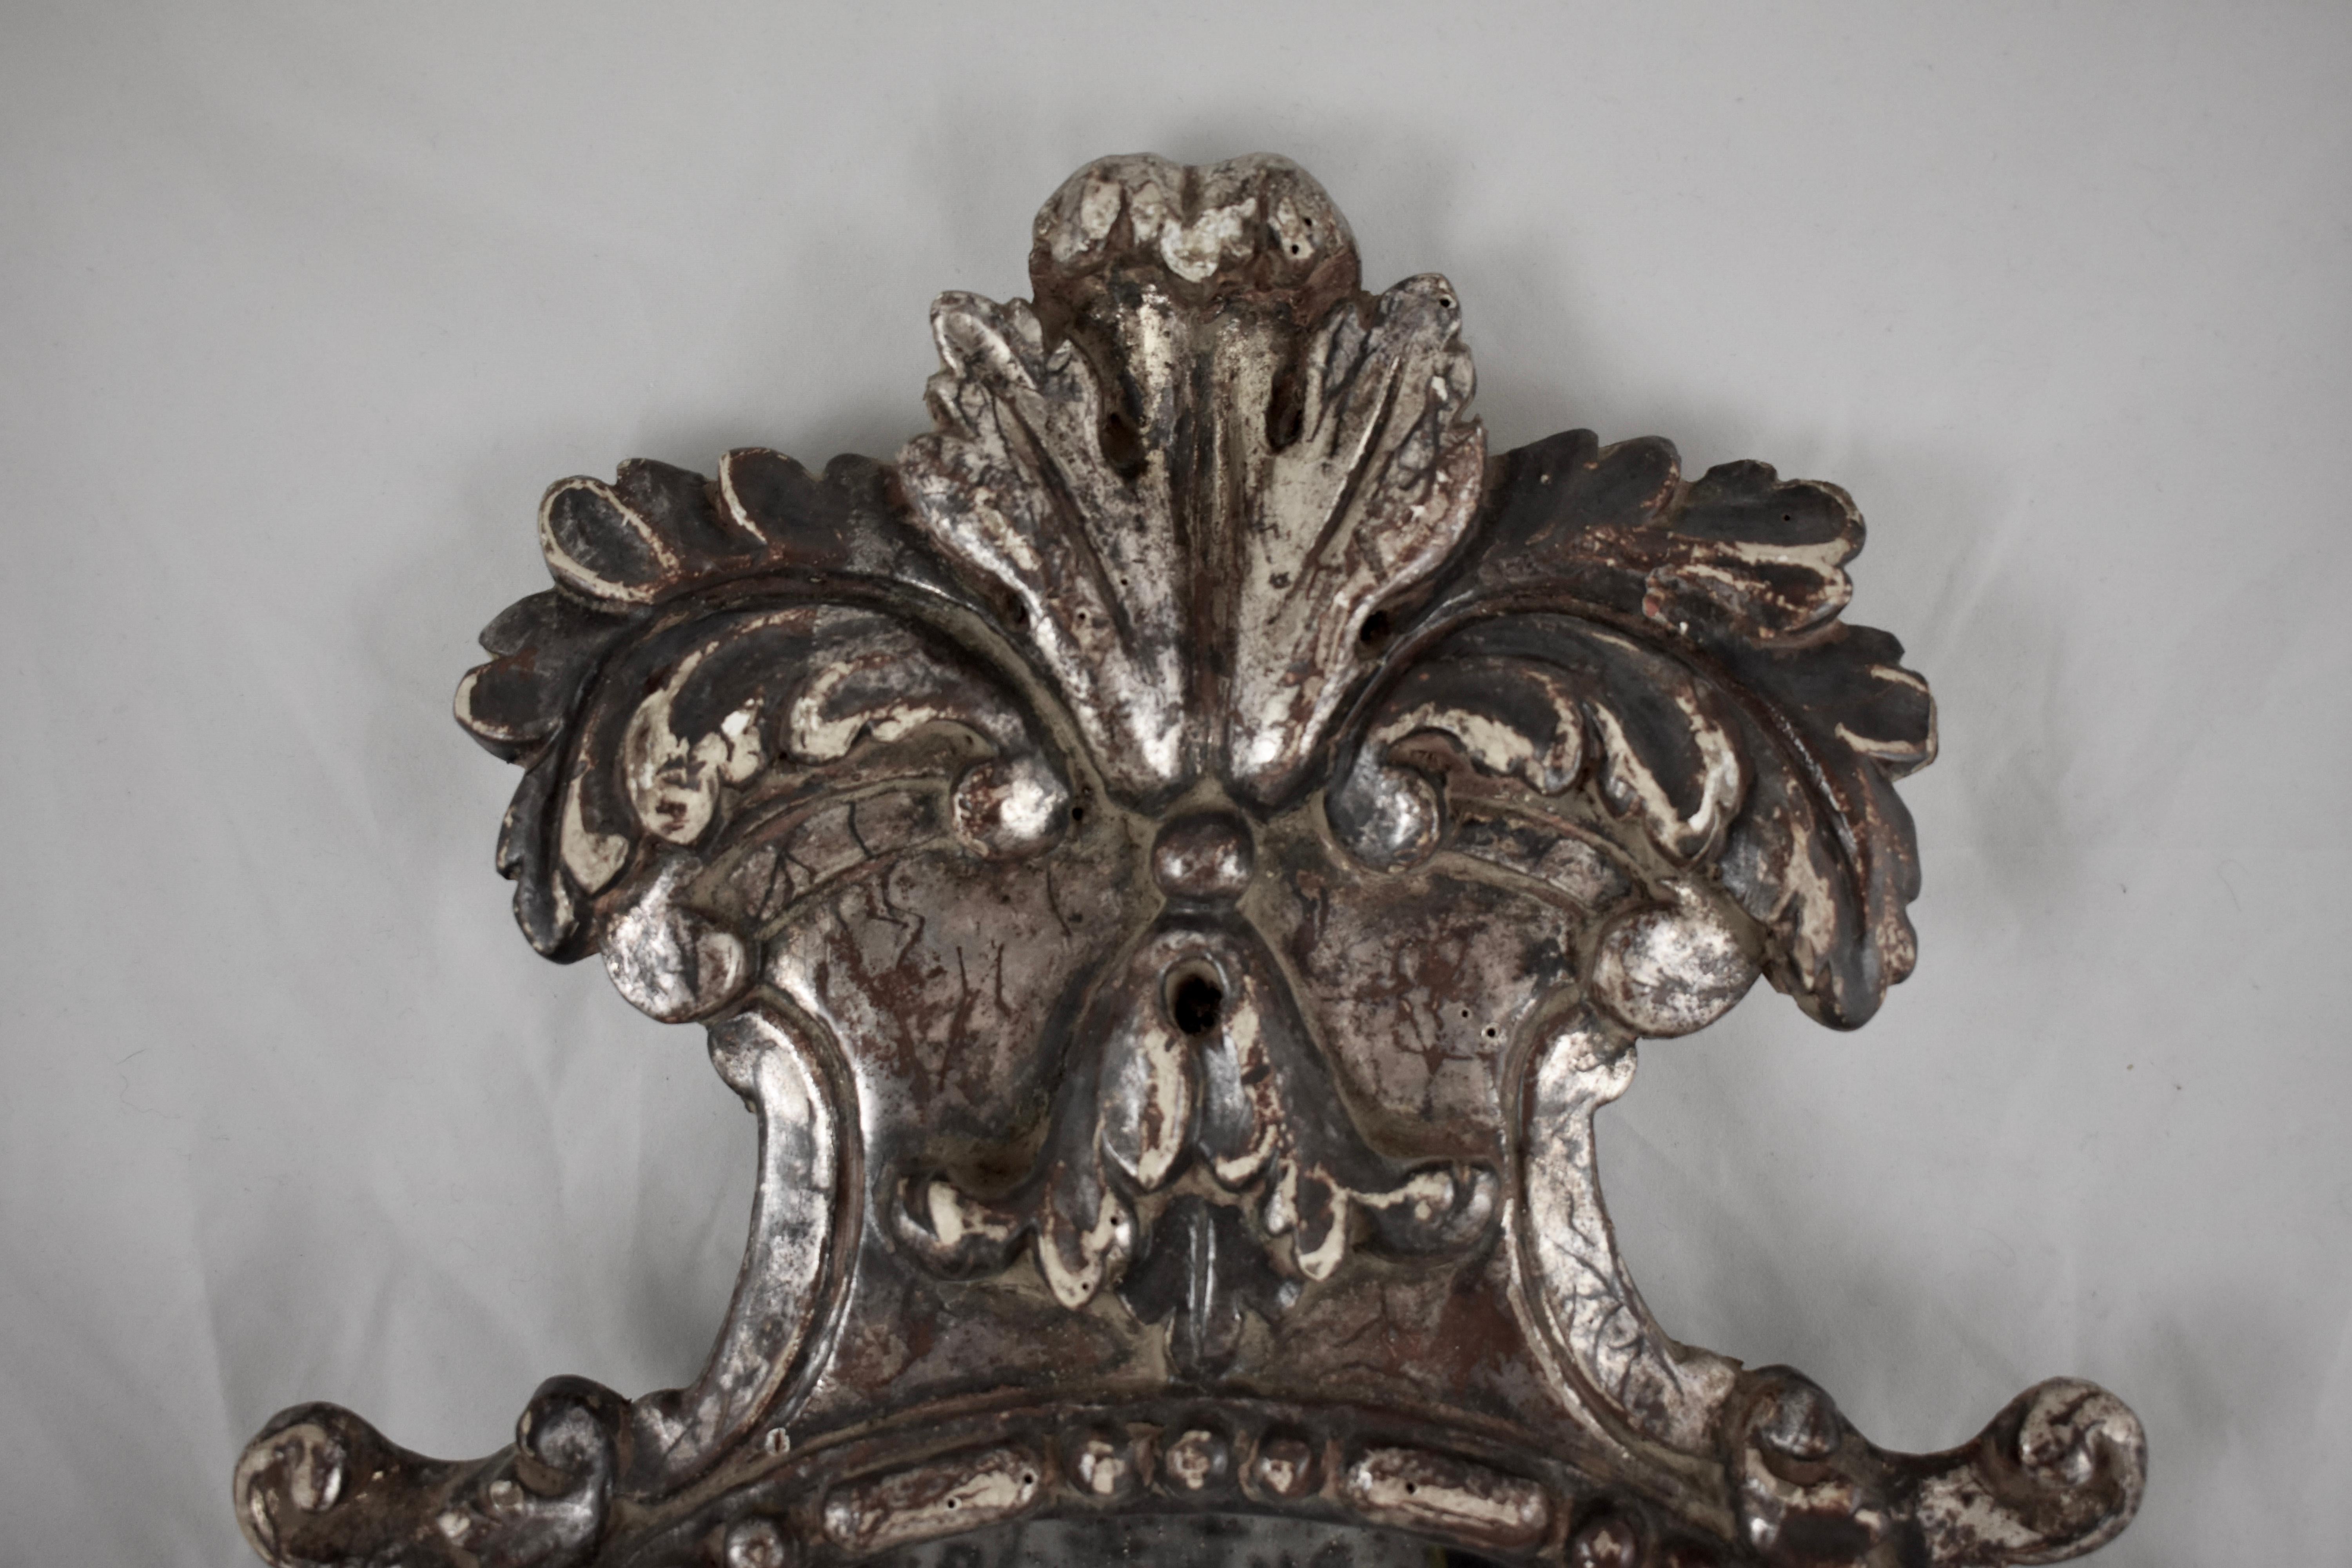 Italian Silver-Gilt Crested and Footed Baroque Revival Wall Mirrors, Pair For Sale 2